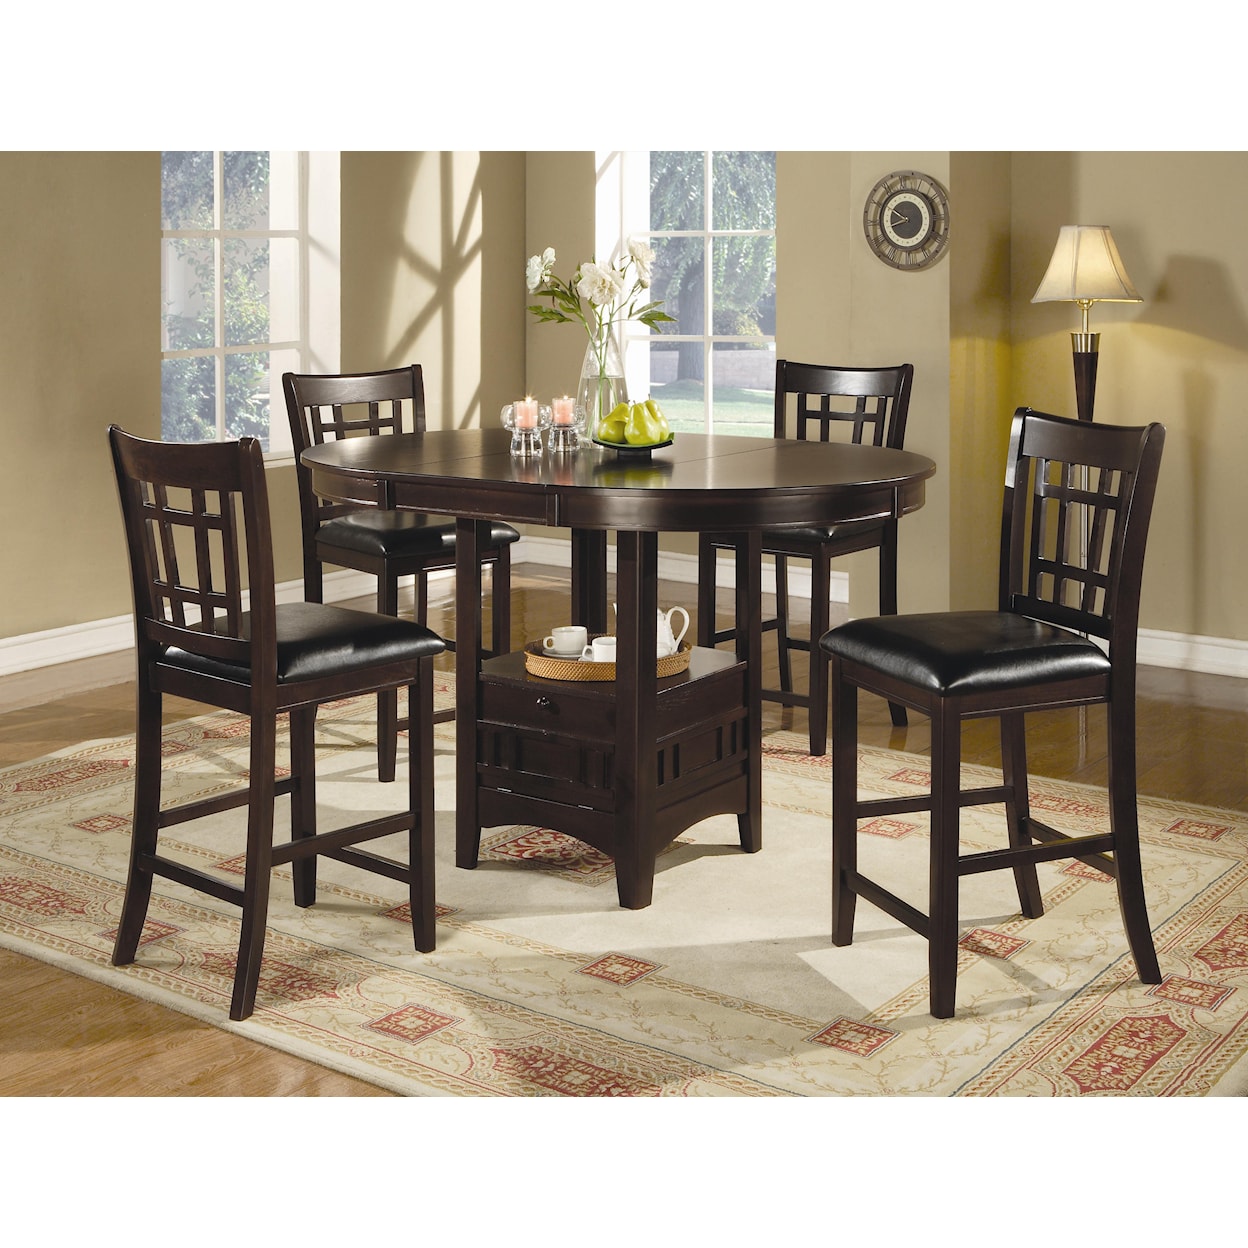 Coaster Lavon 7pc Dining Room Group